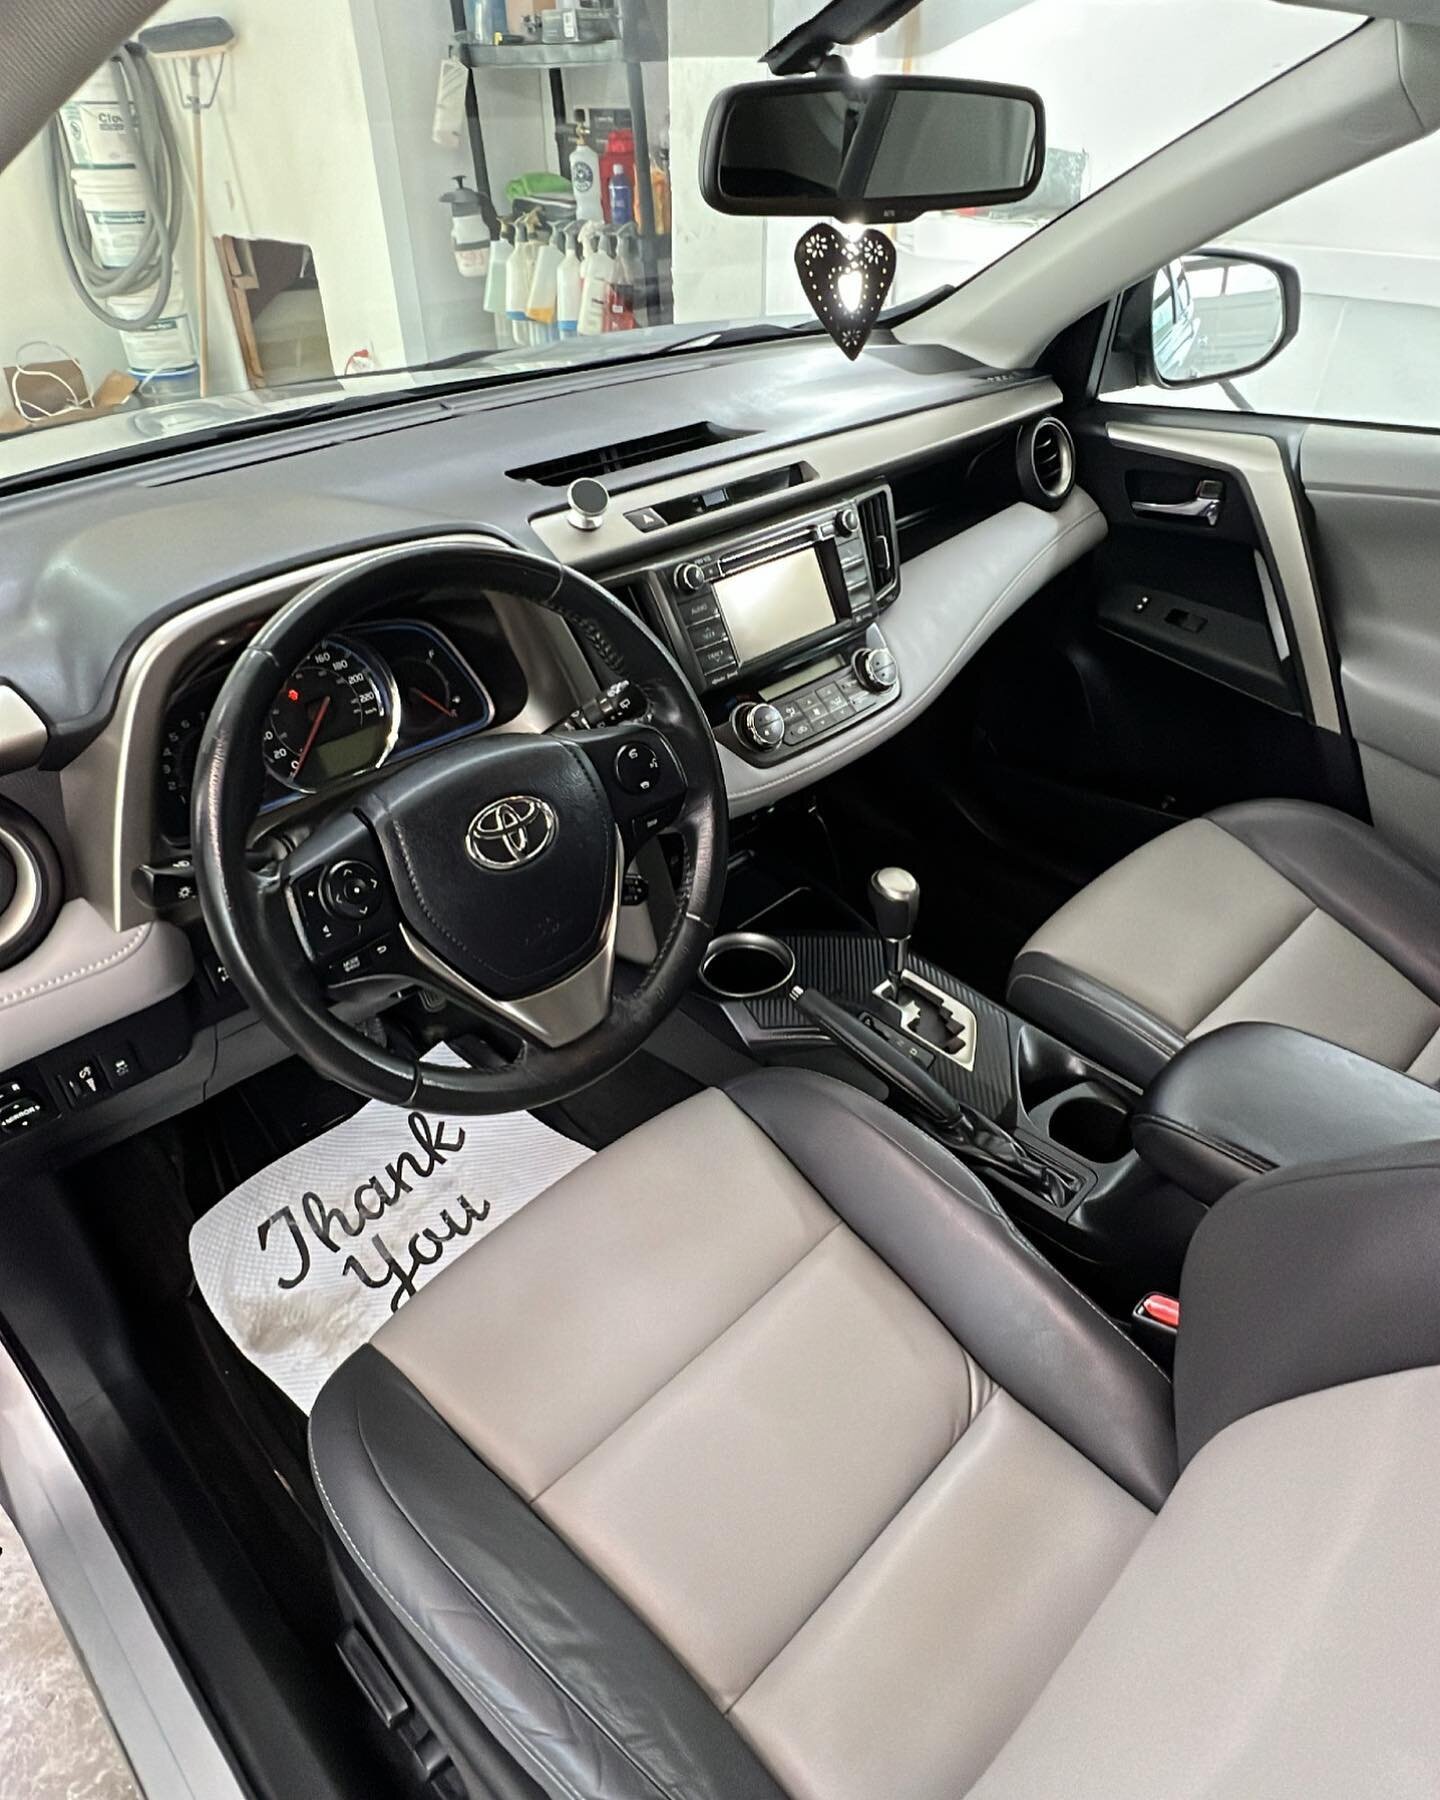 2013 RAV 4 received the PRE SALE detail special,
- full interior with leather treatment 
- full exterior 
- scratch touch up 
🔥🔥🔥🔥

DM/Text/Call today to book your next appointment!
📞 778-212-4994
📍 4316 29th Ave 
🥇 Ceramic pro
🫰🏽pick up/ dr